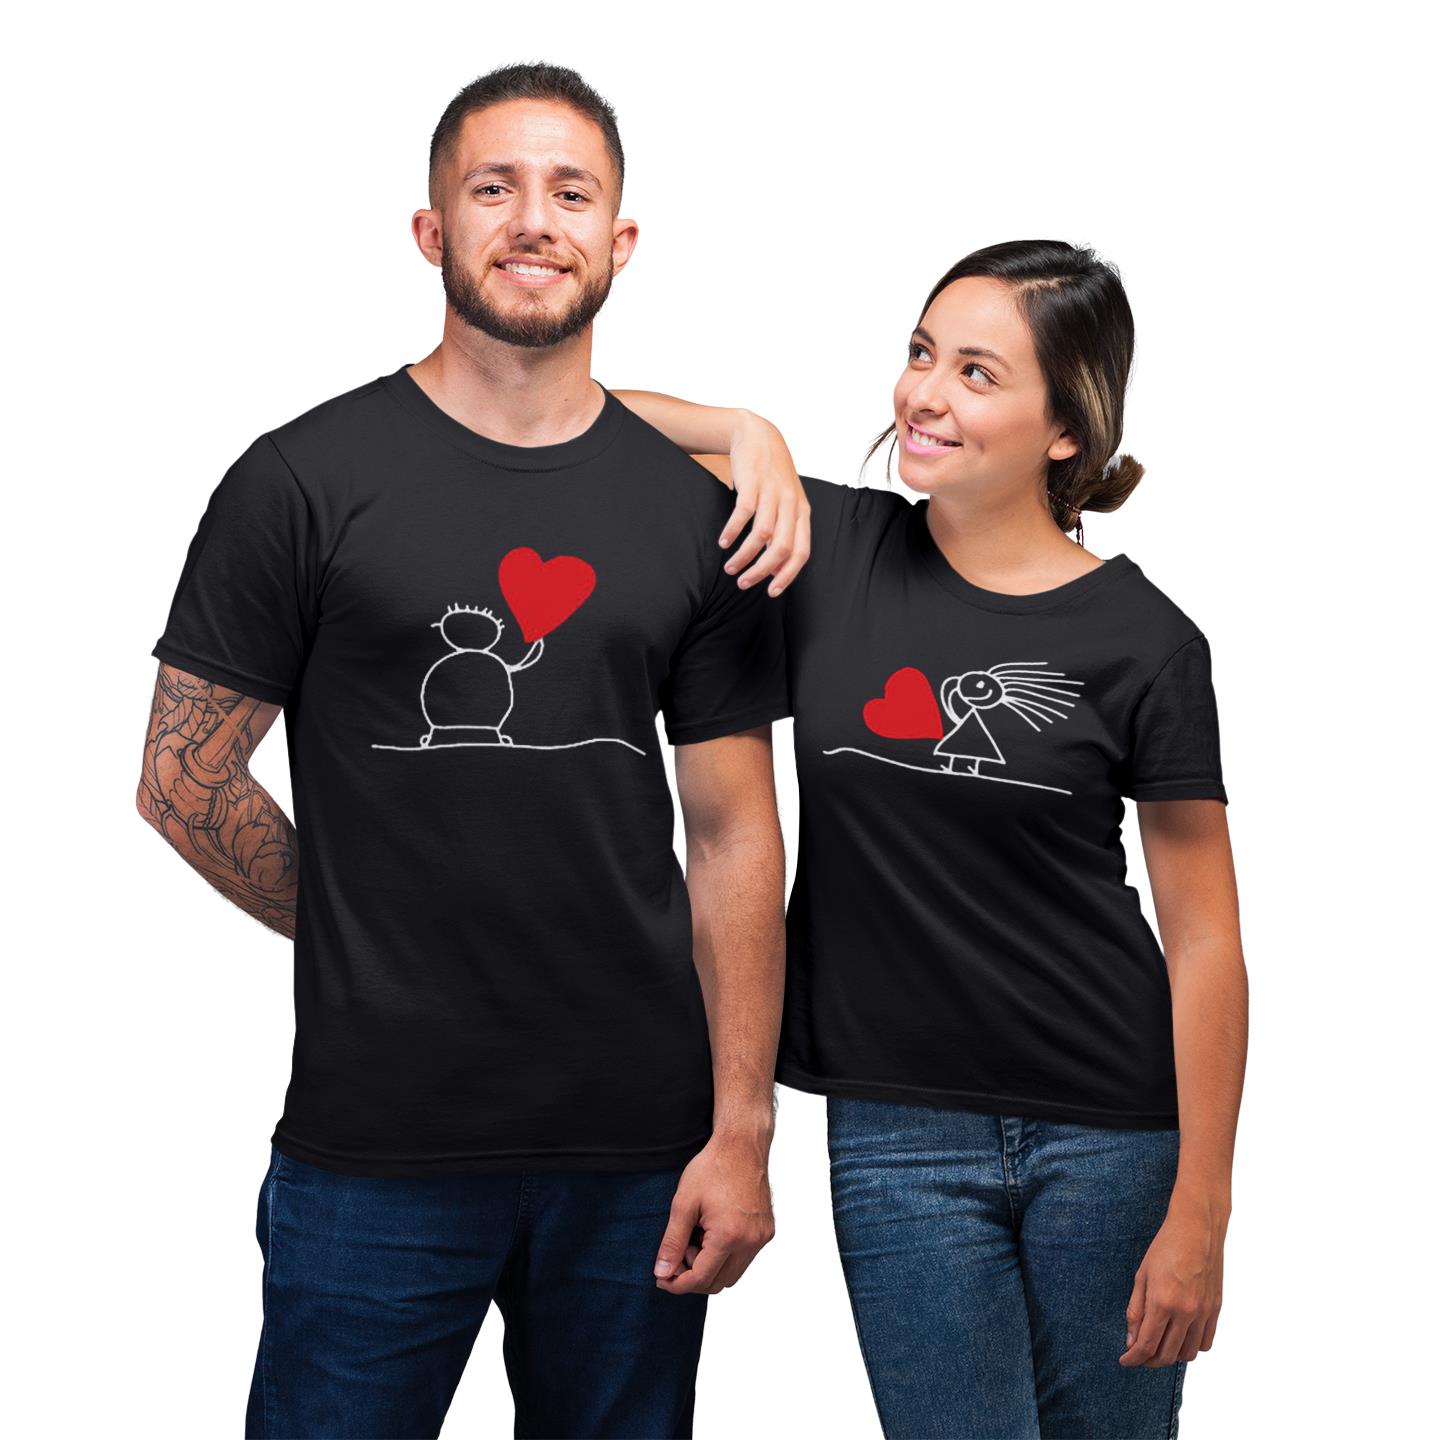 Giving Heart Him And Her Shirt For Couple Matching T-shirt